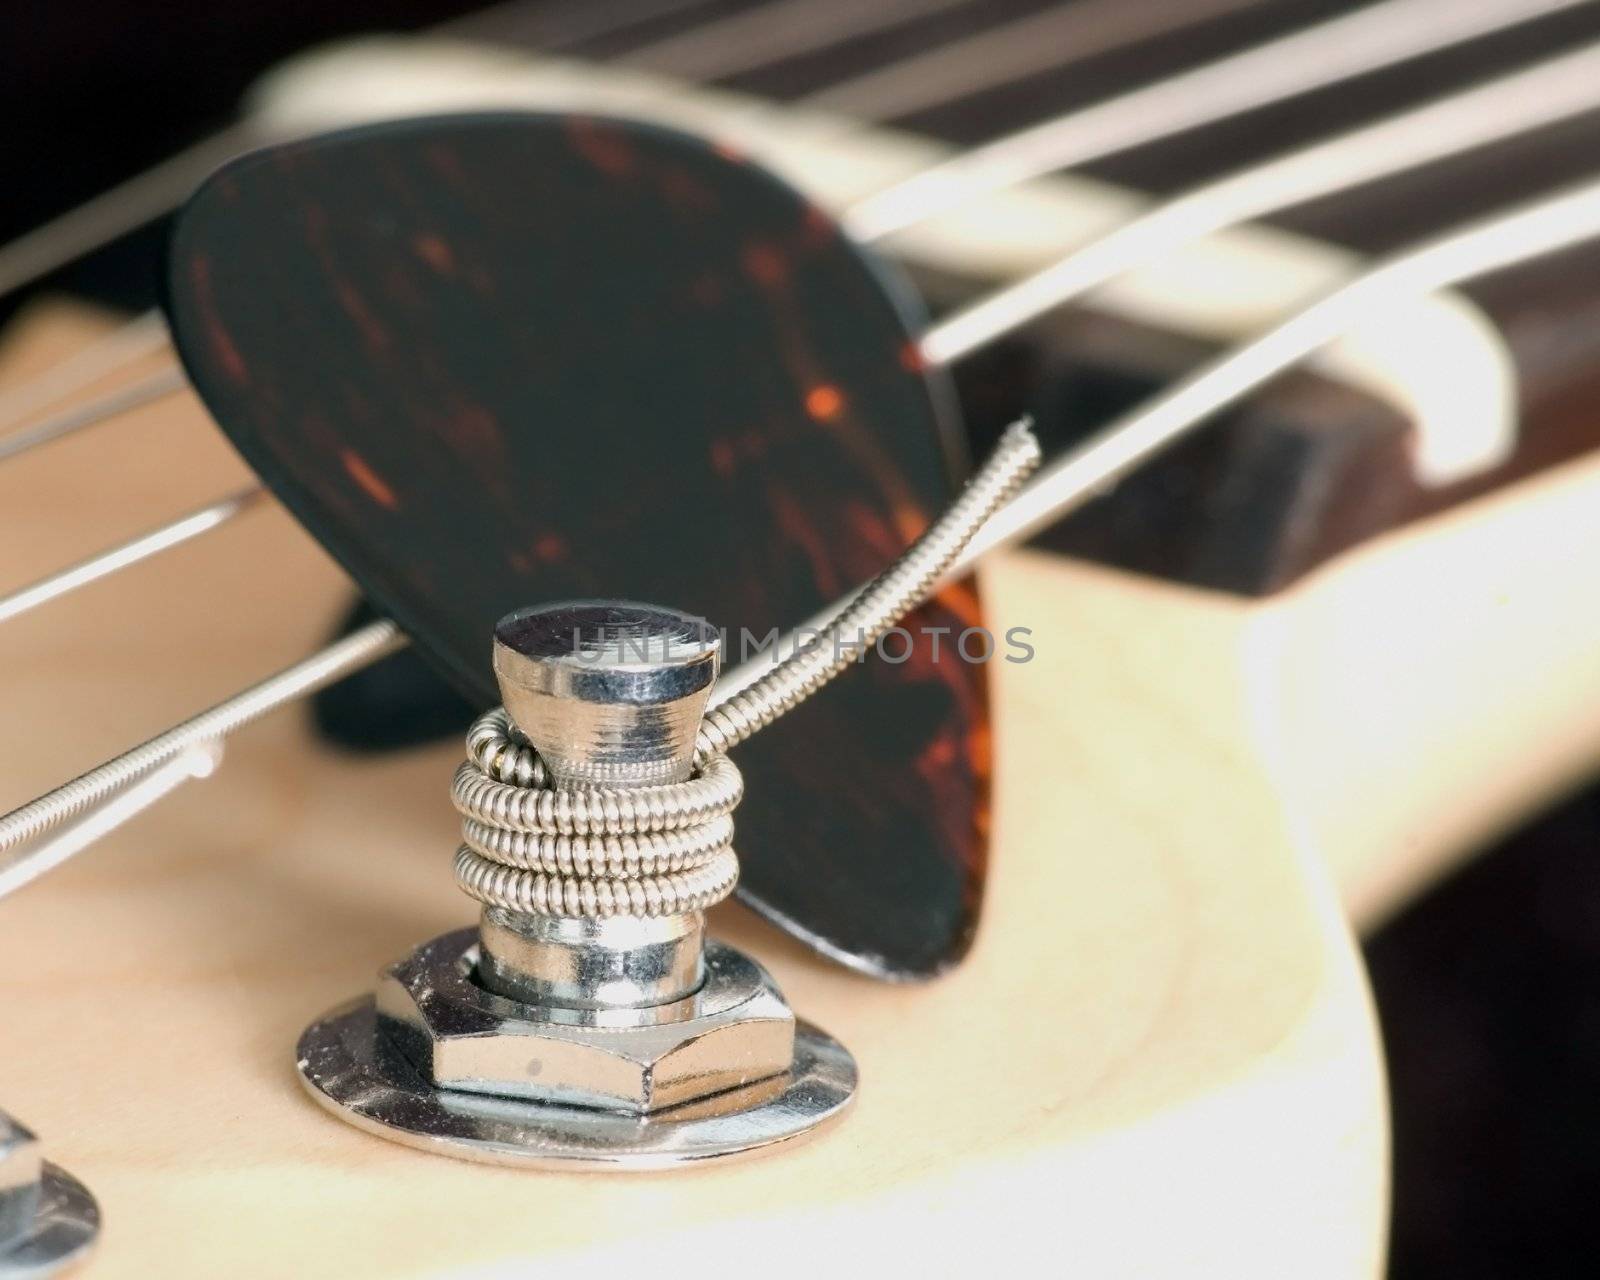 An electric guitar tuning peg with pick in the strings.